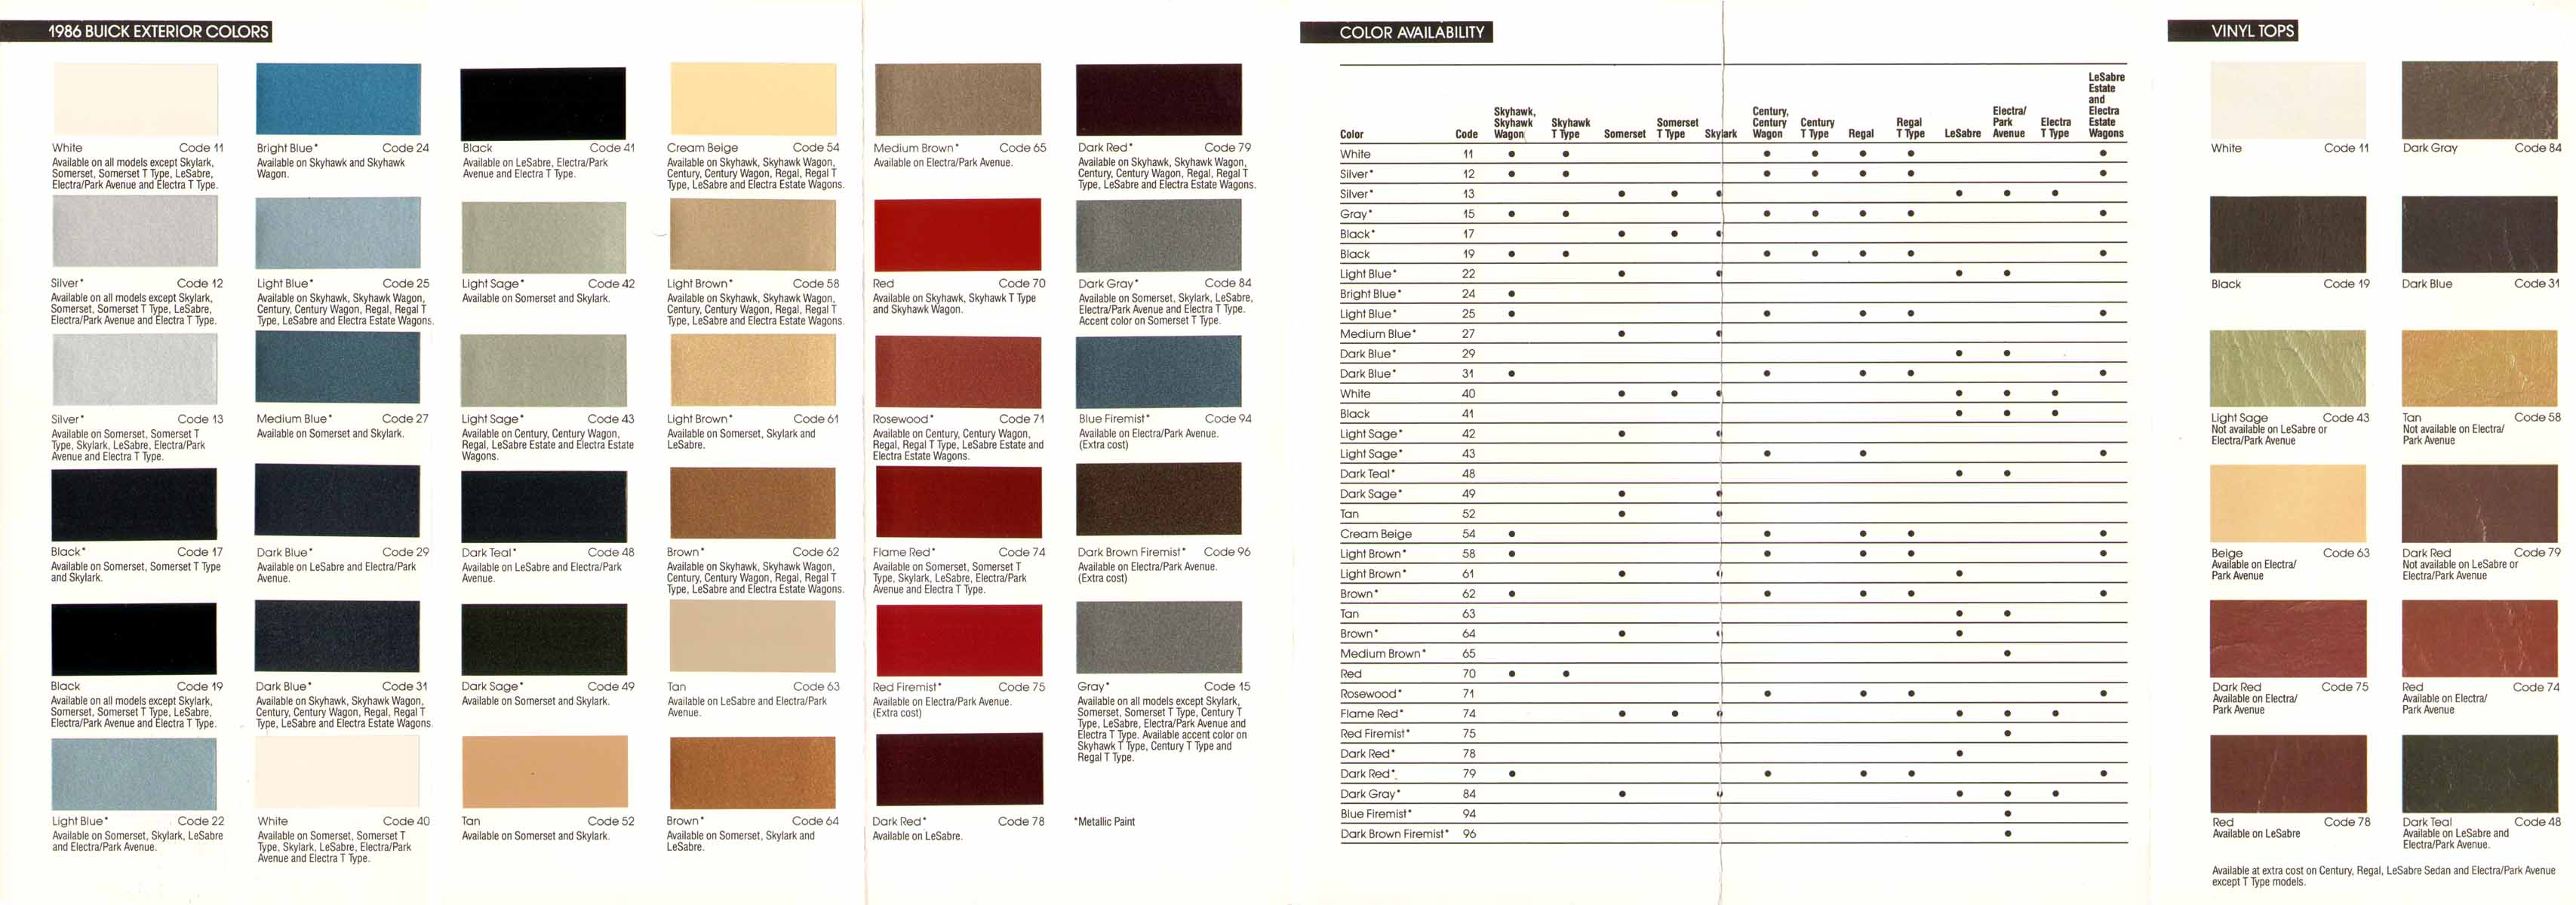 1986 Buick Exterior Colors-02 to 07